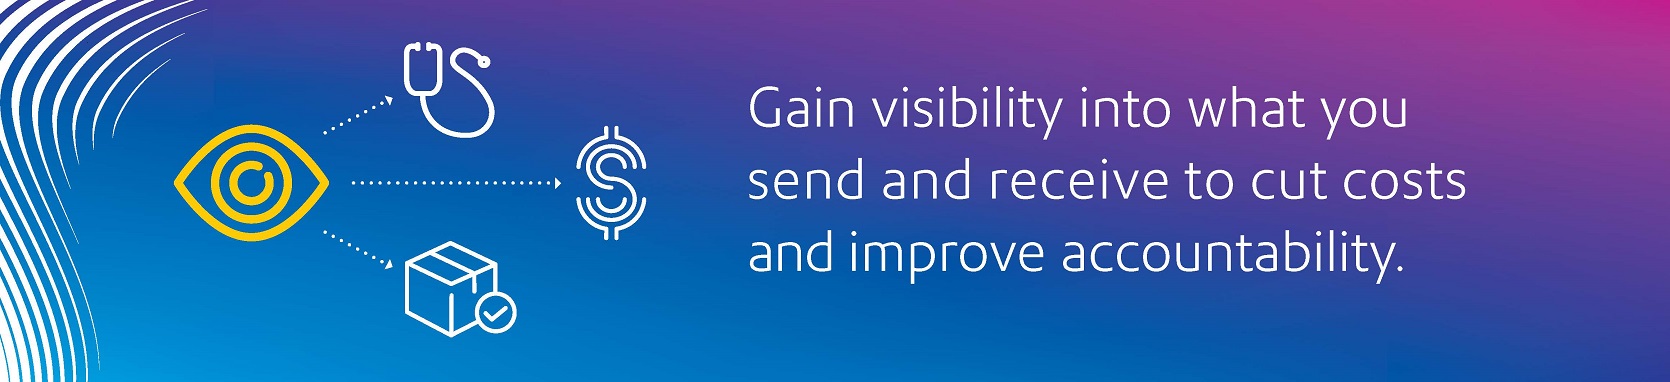 Gain visibility into what you send and receive to cut costs and improve accountability